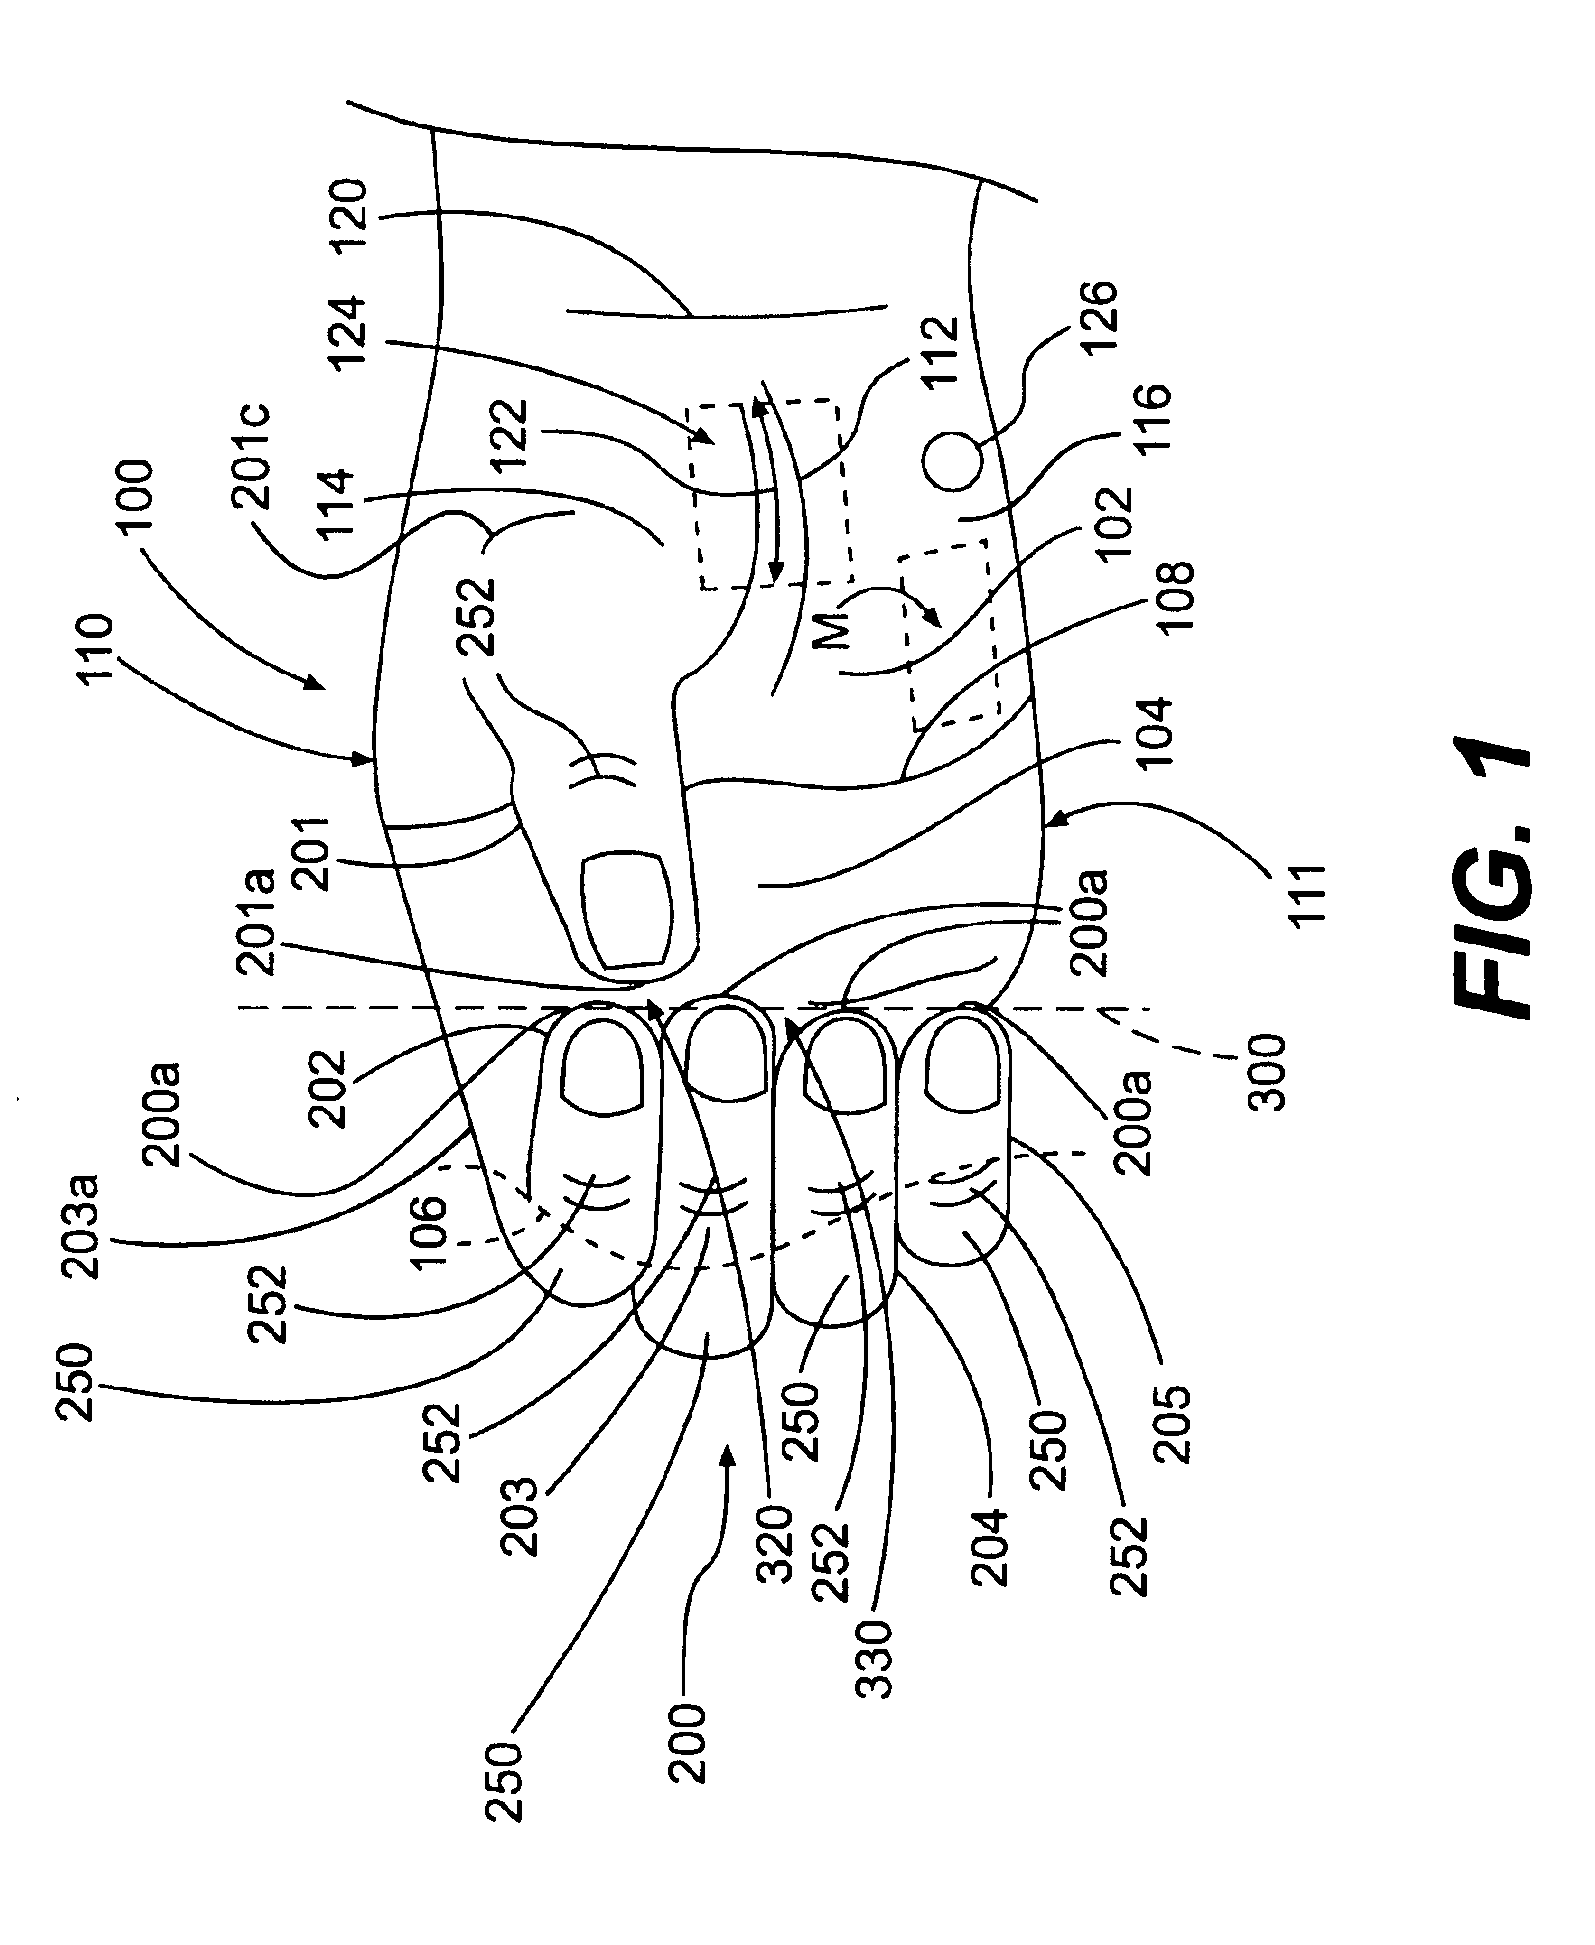 Handle and forceps/tweezers and method and apparatus for designing the like